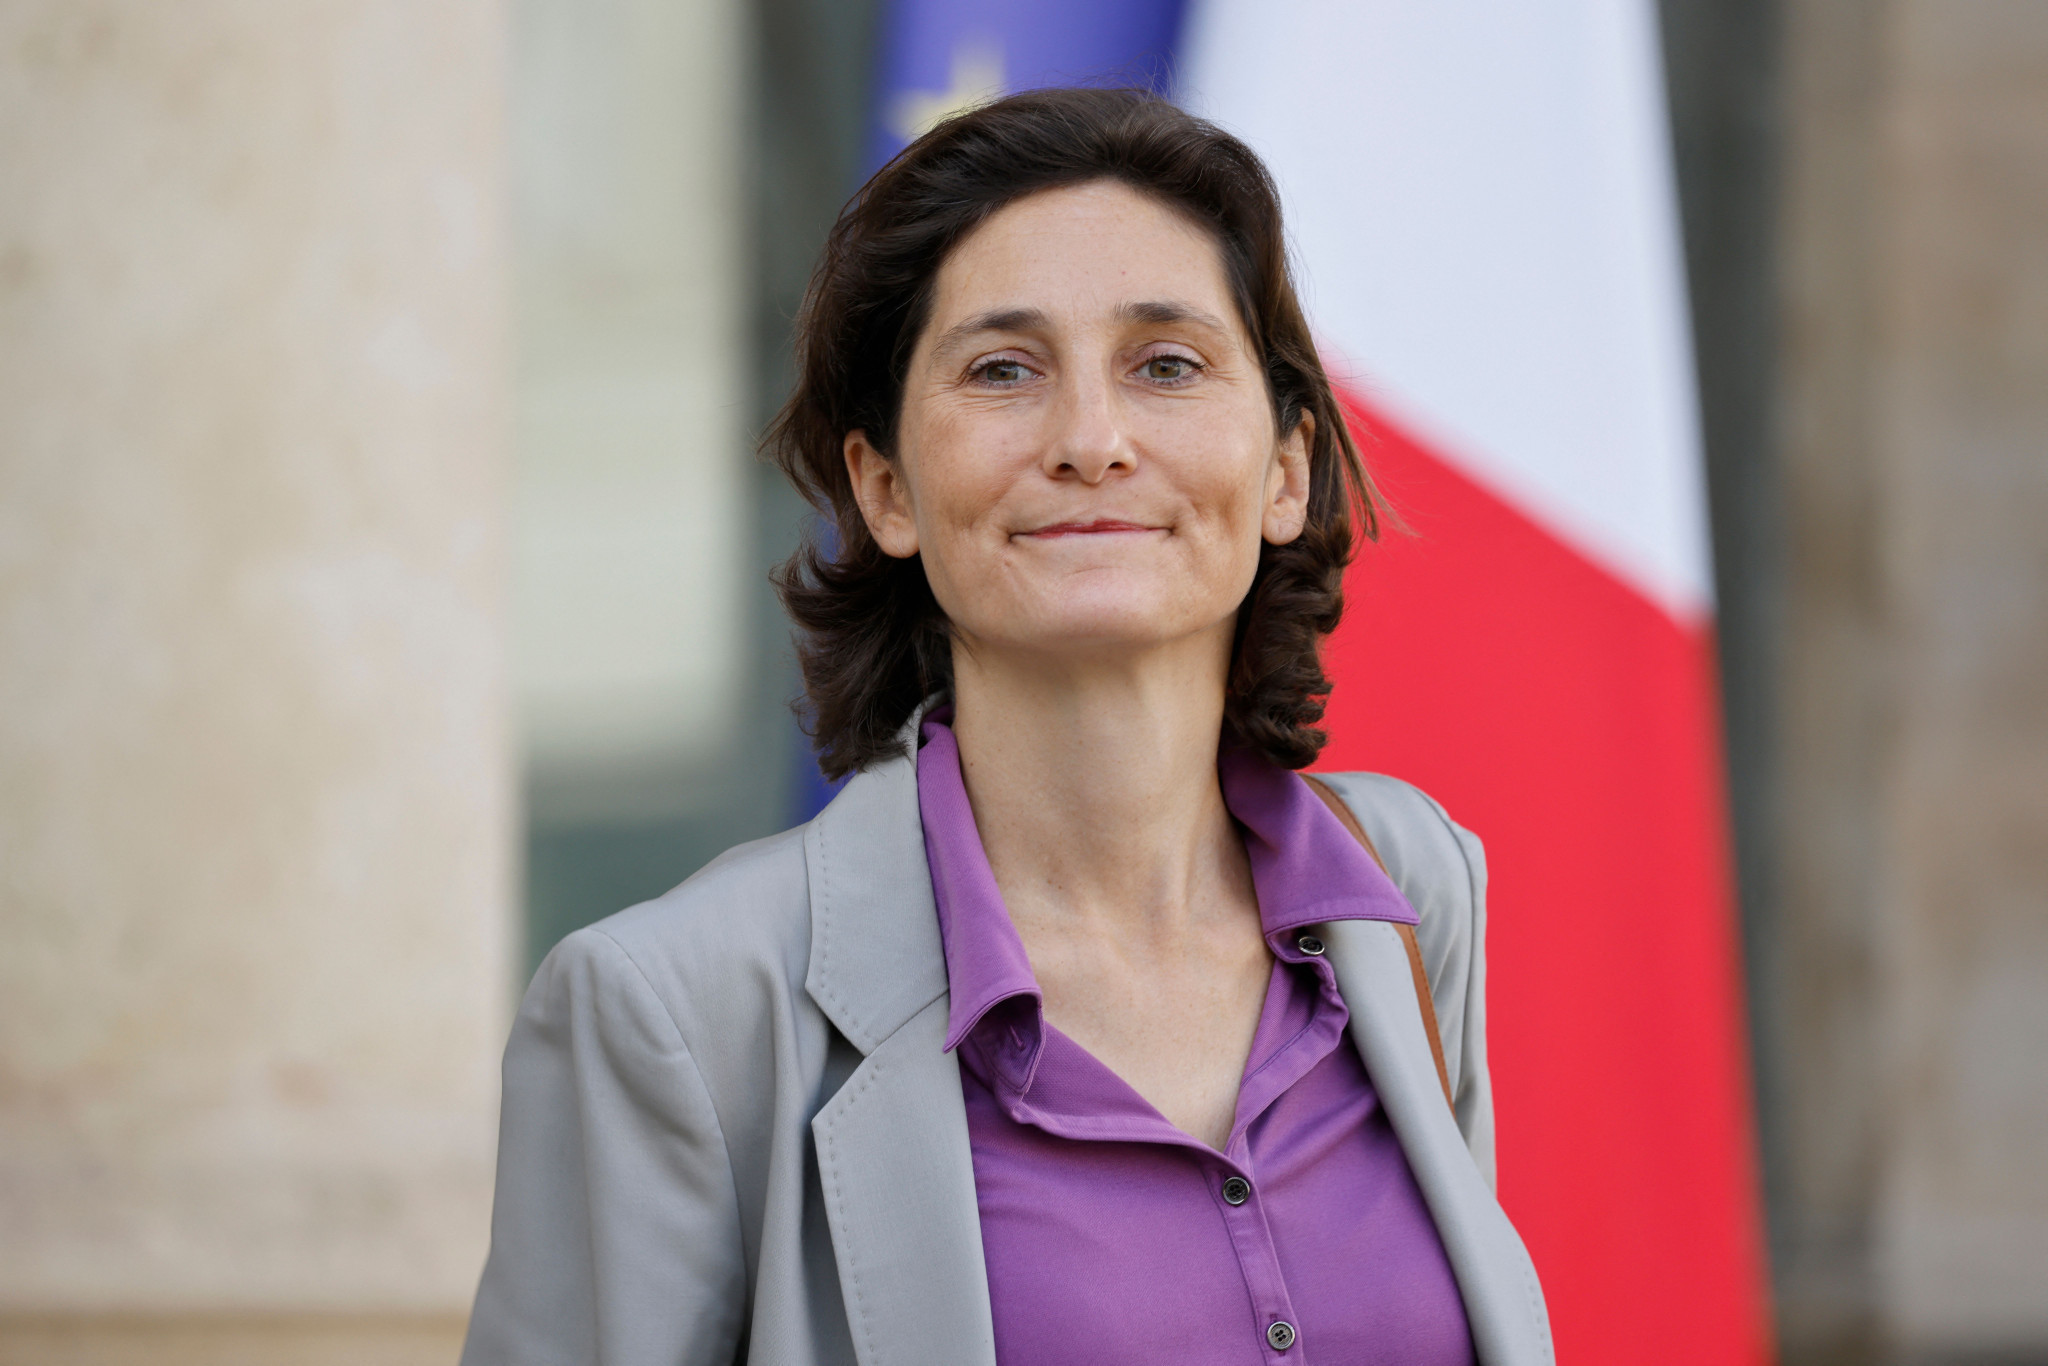 French Sports Minister Amélie Oudéa-Castéra has urged Novak Djokovic to refrain from posting further political messages at Roland Garros ©Getty Images